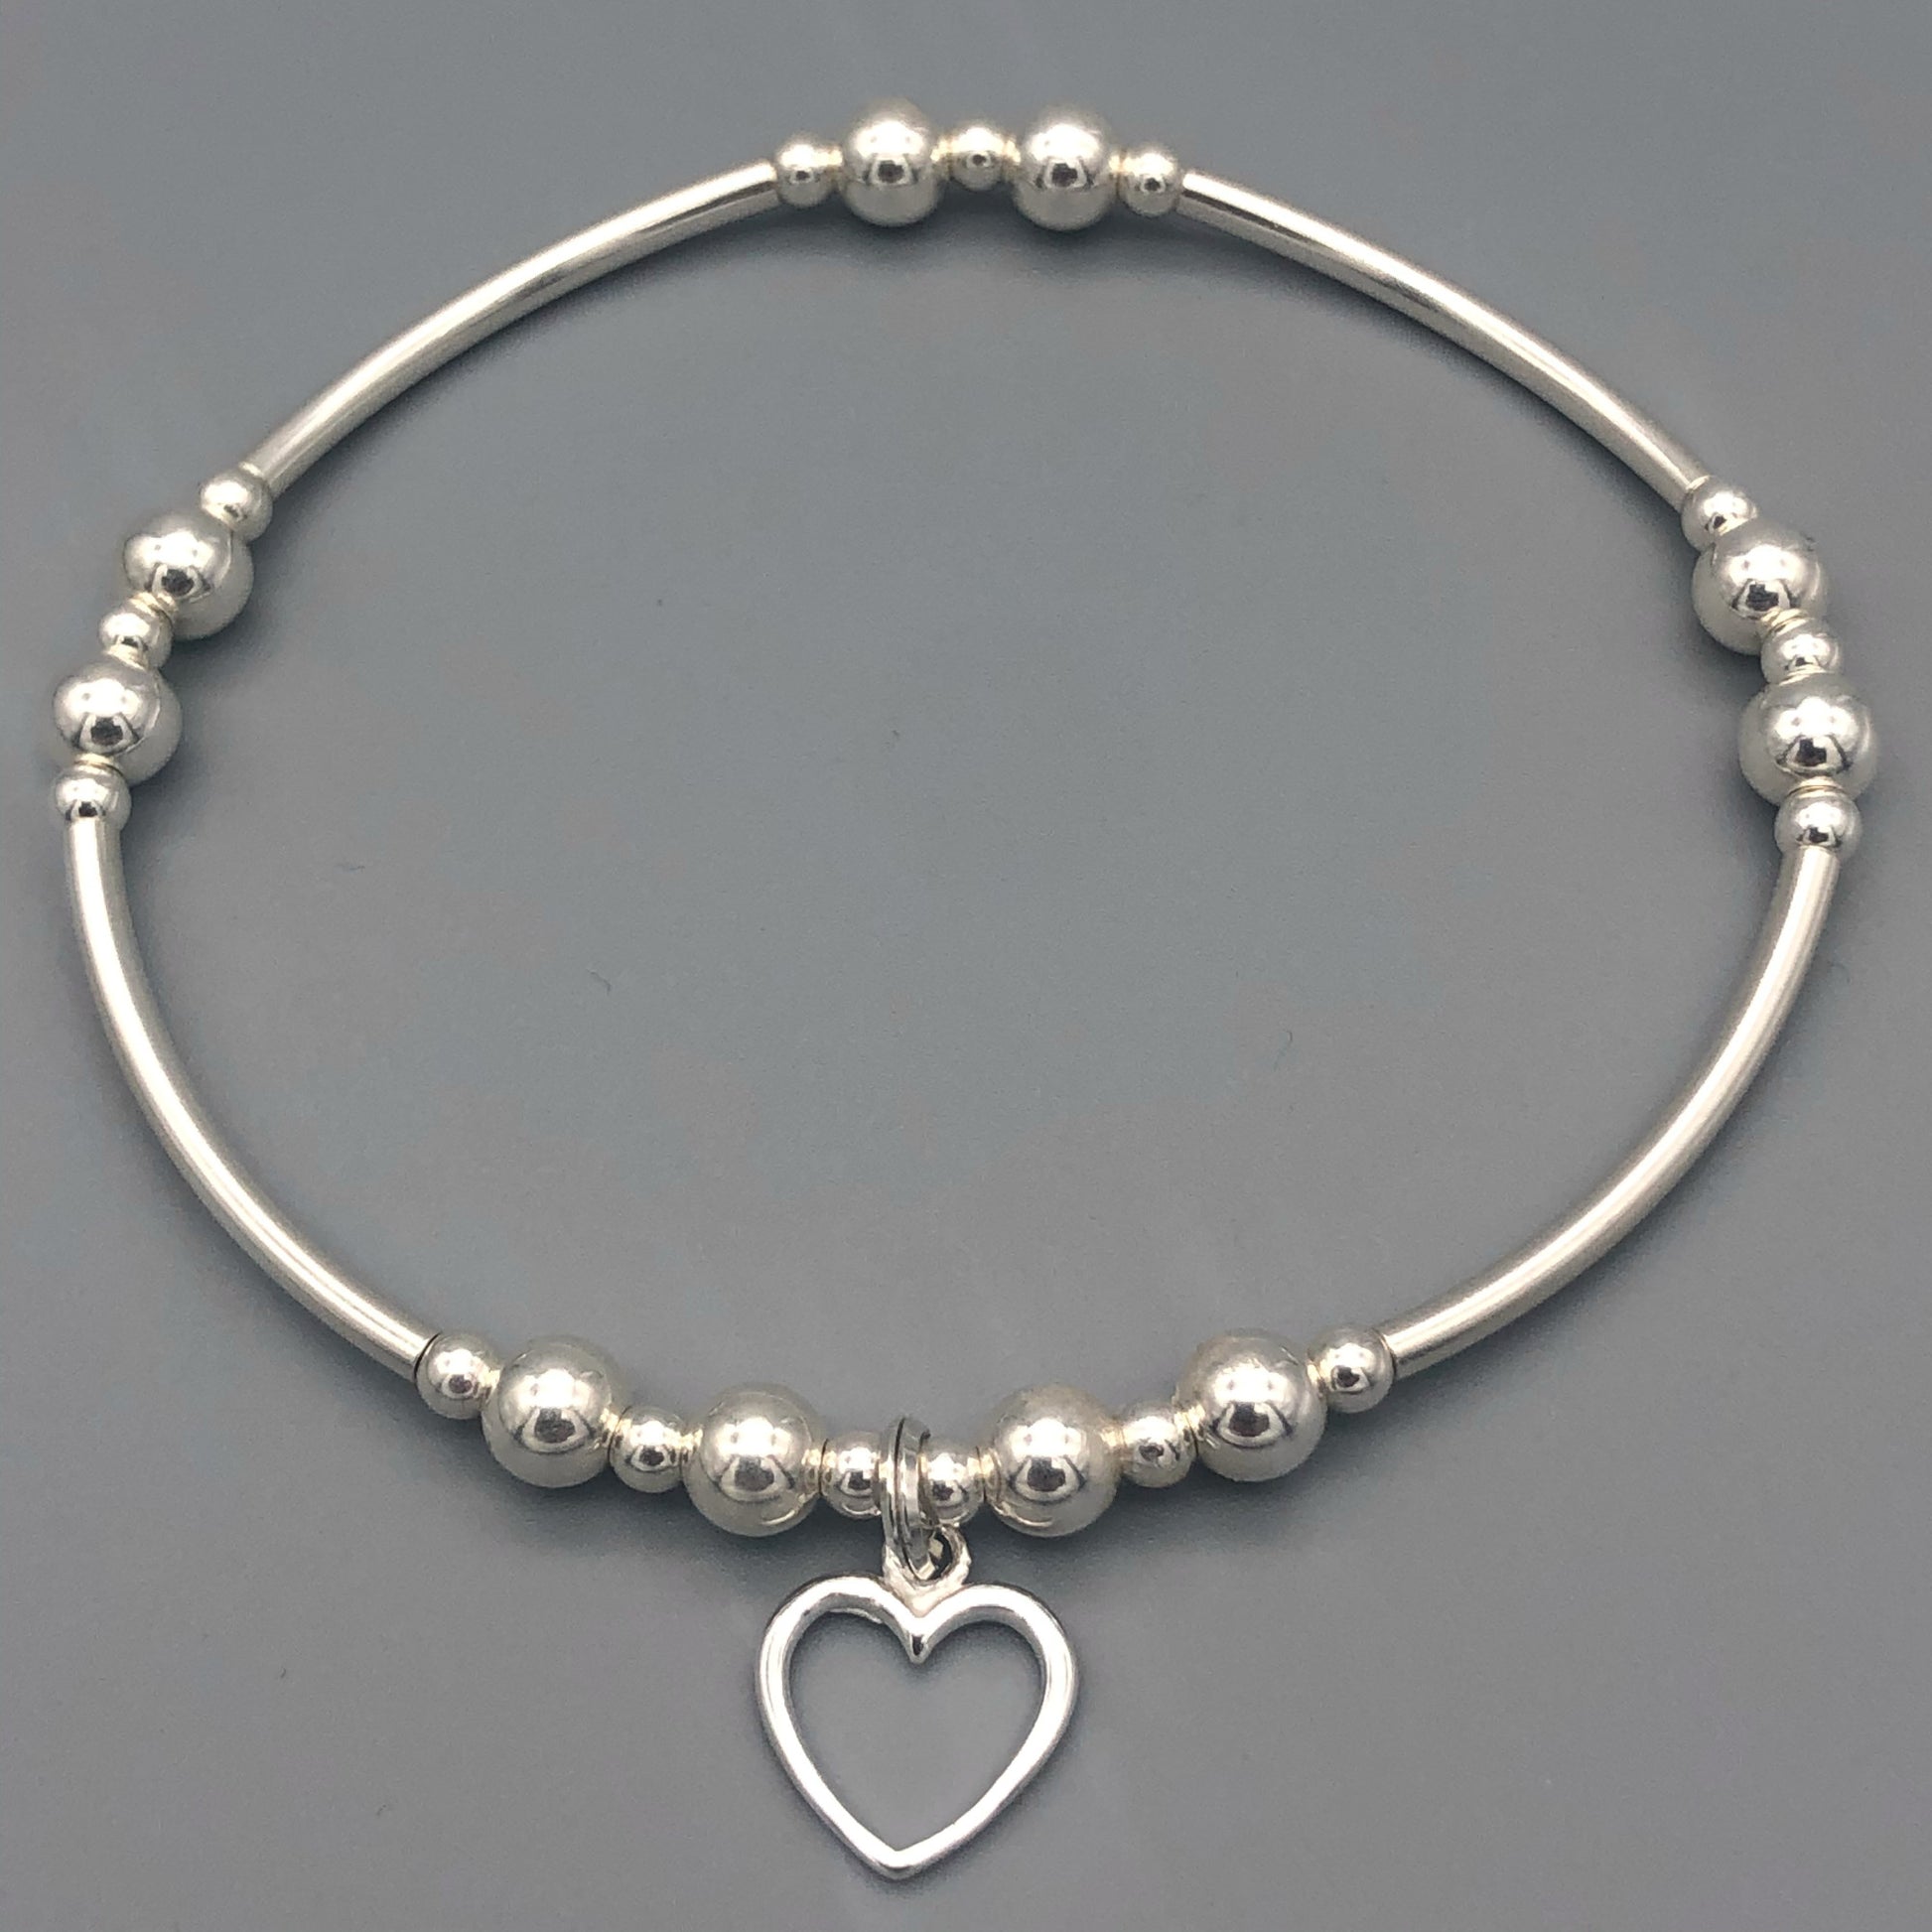 Small open heart sterling silver stacking charm bracelet by My Silver Wish